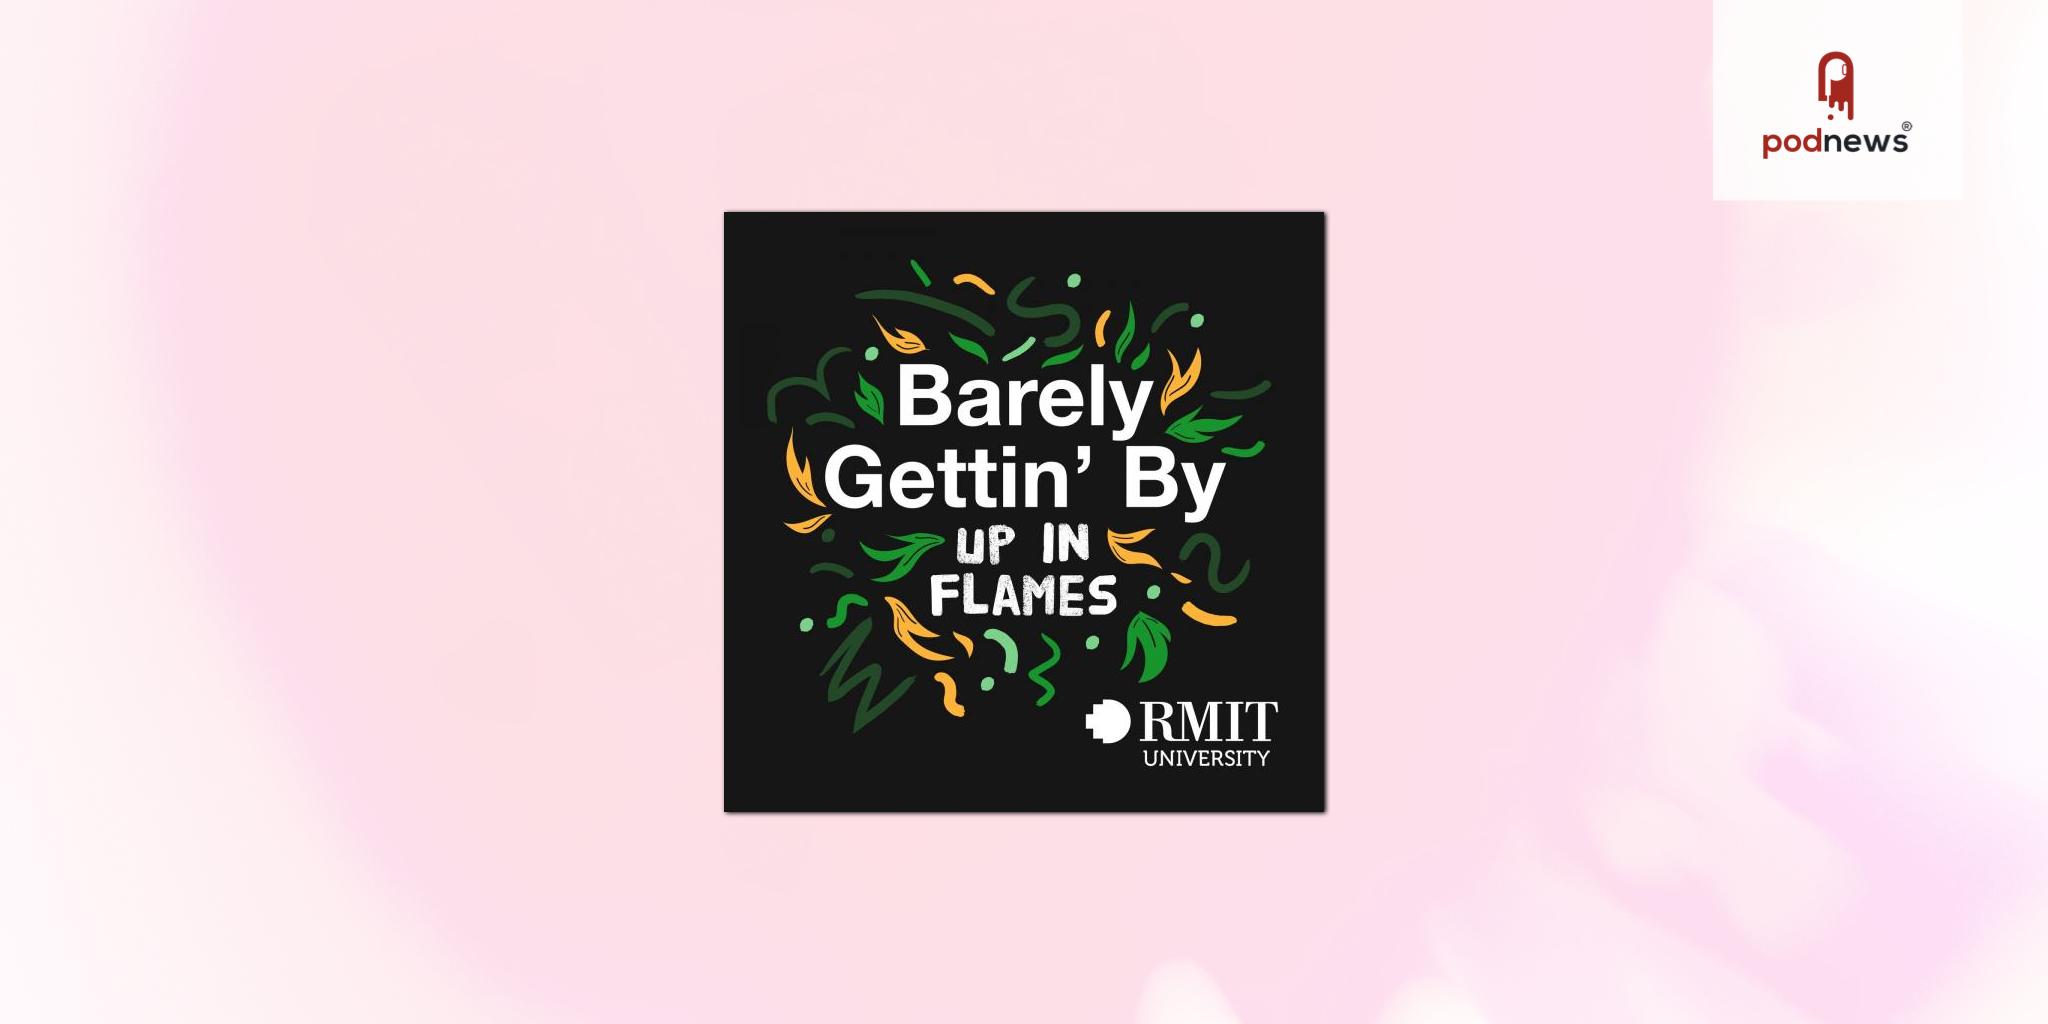 RMIT podcast Barely Gettin’ By is back for season four